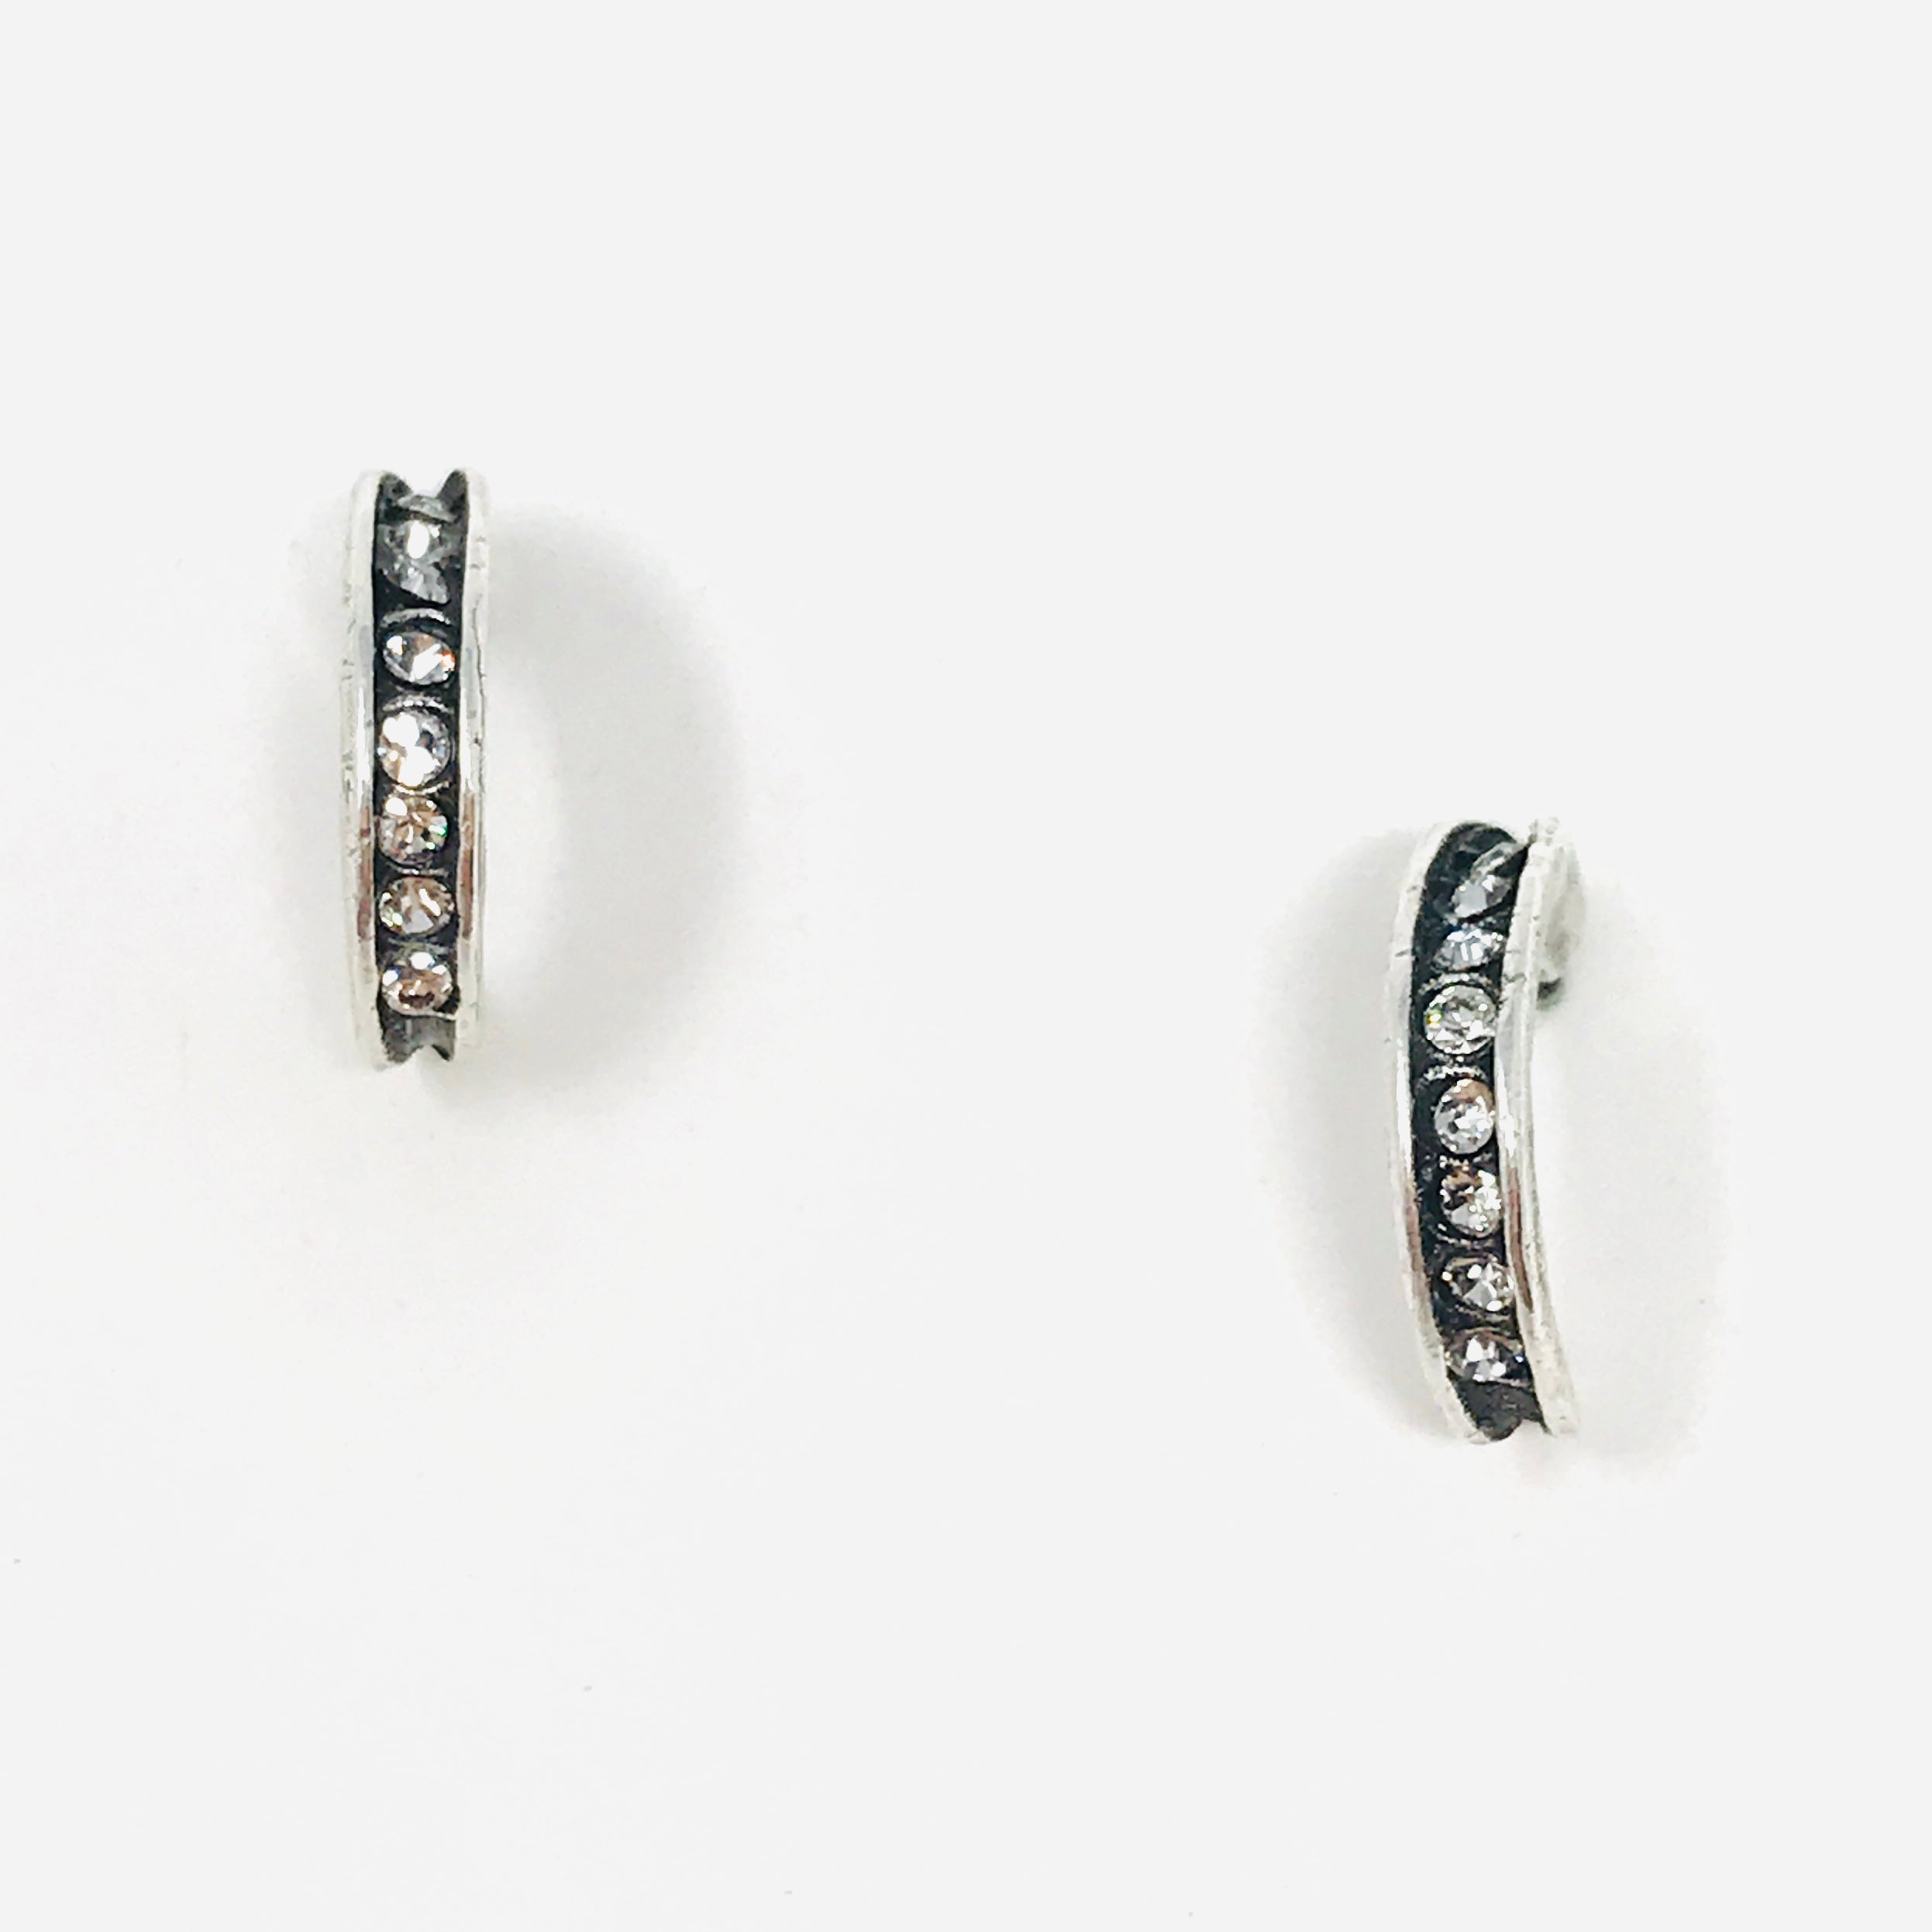 silver post earrings with stones